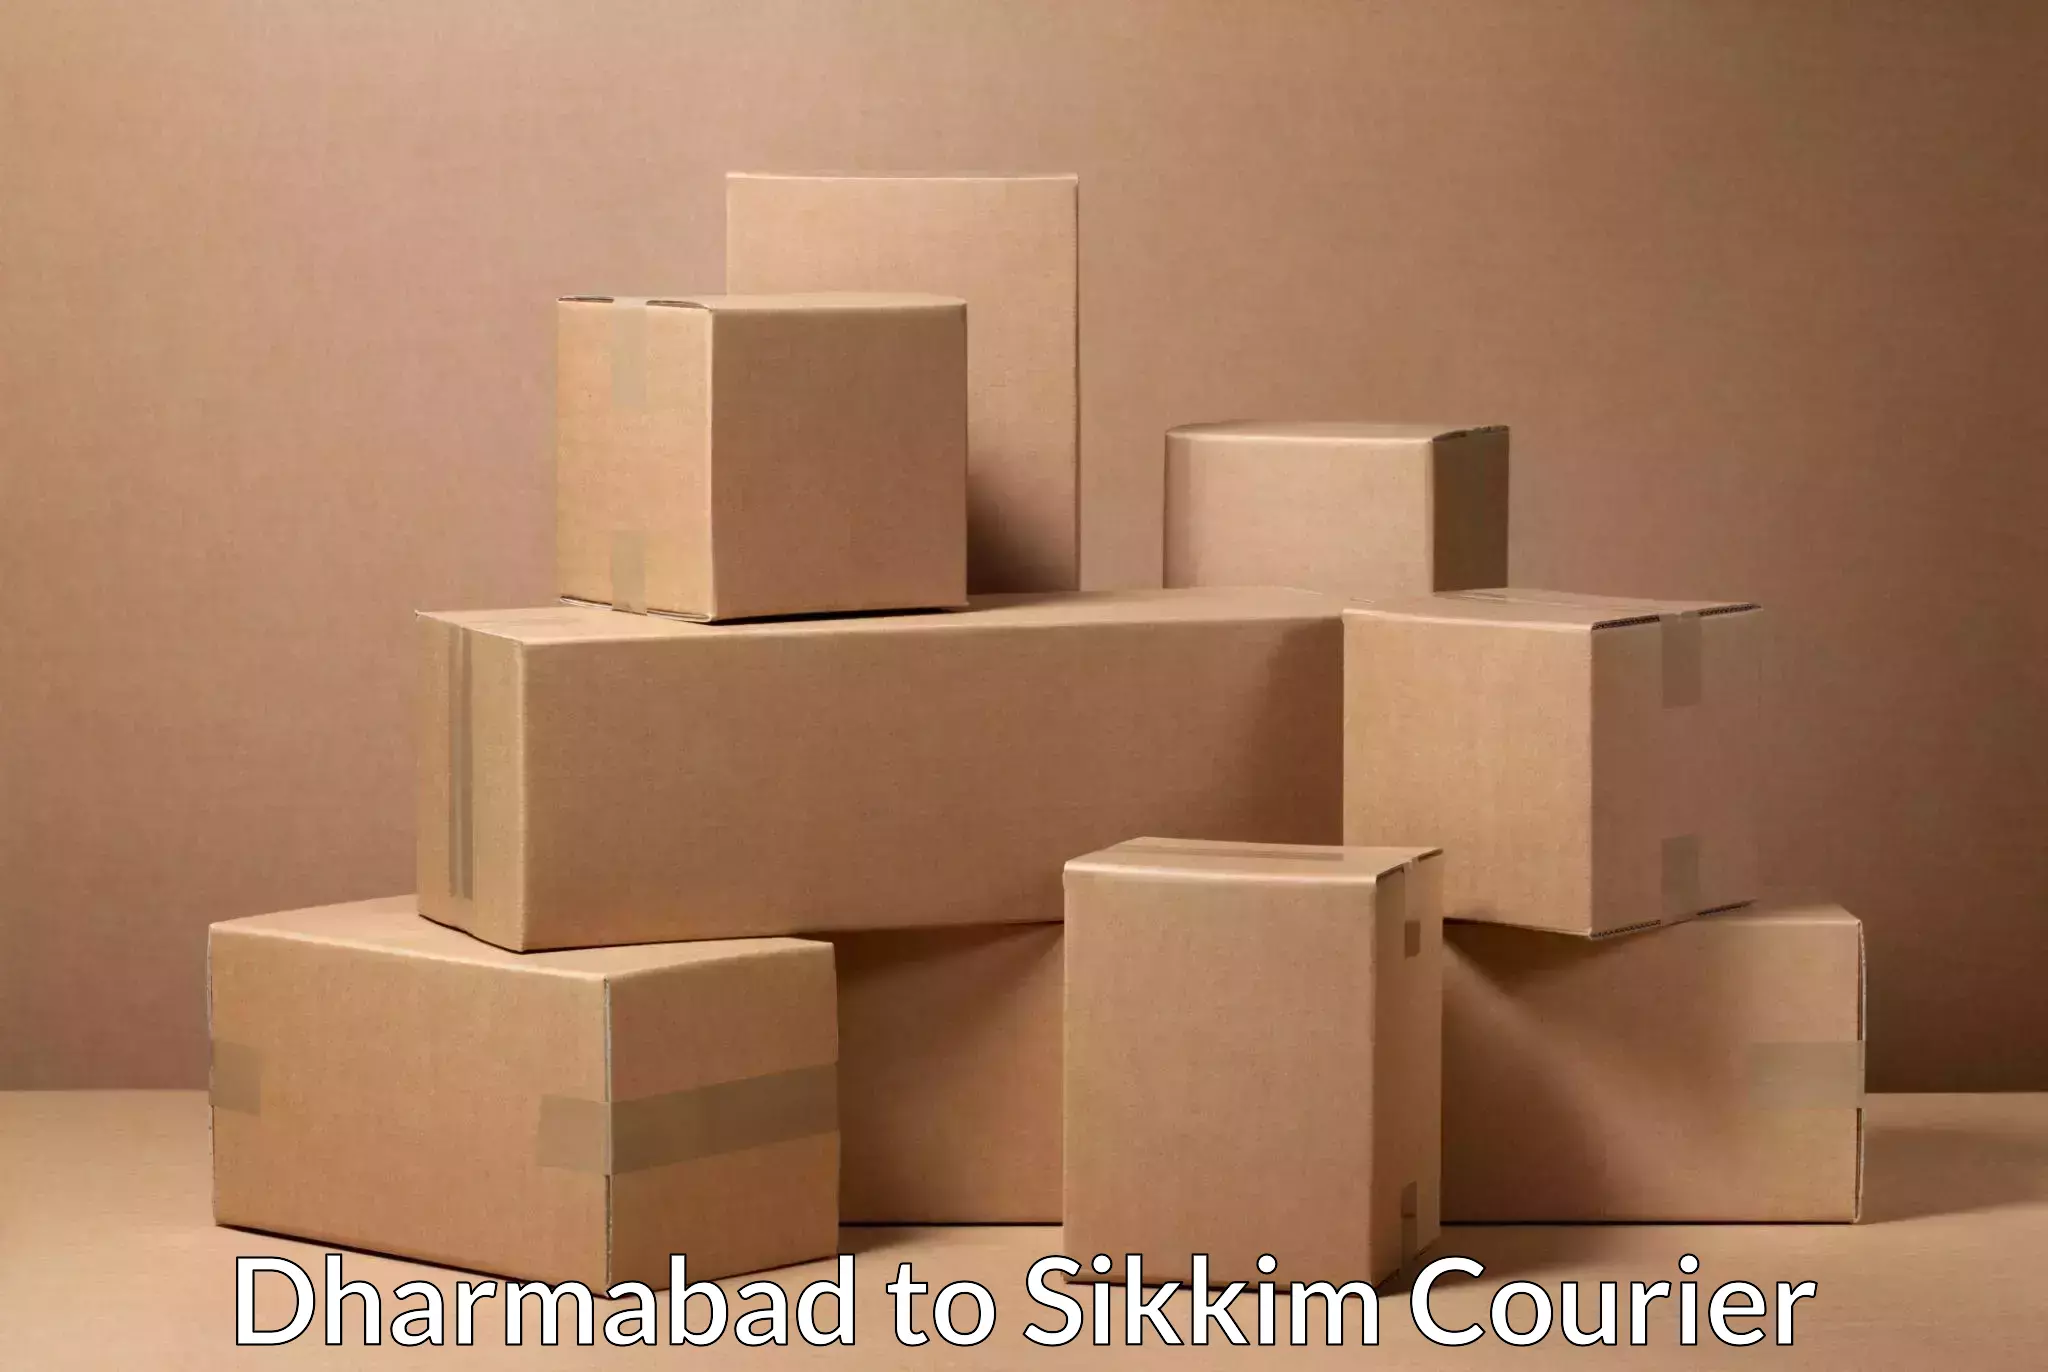 Bulk courier orders Dharmabad to Gangtok